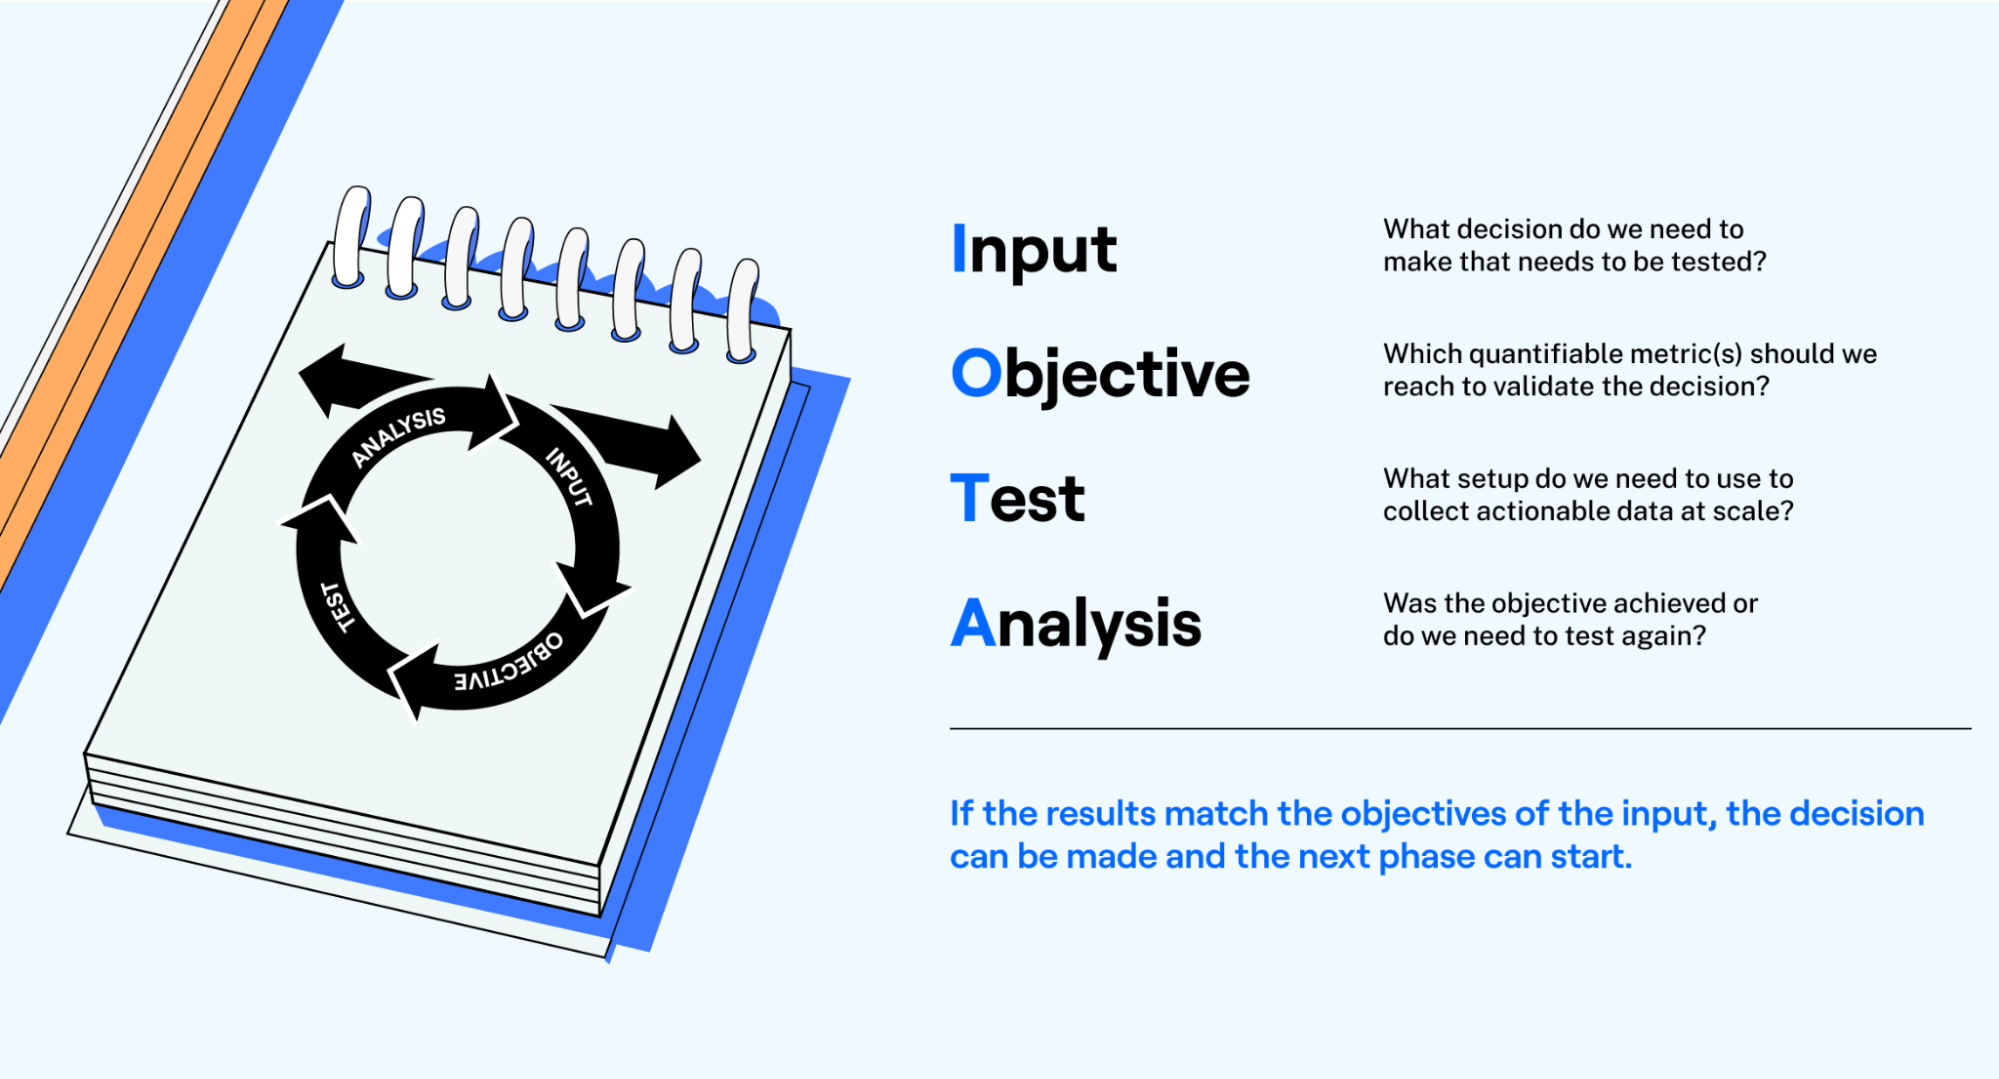 Input-Objective-Test-Analysis loops